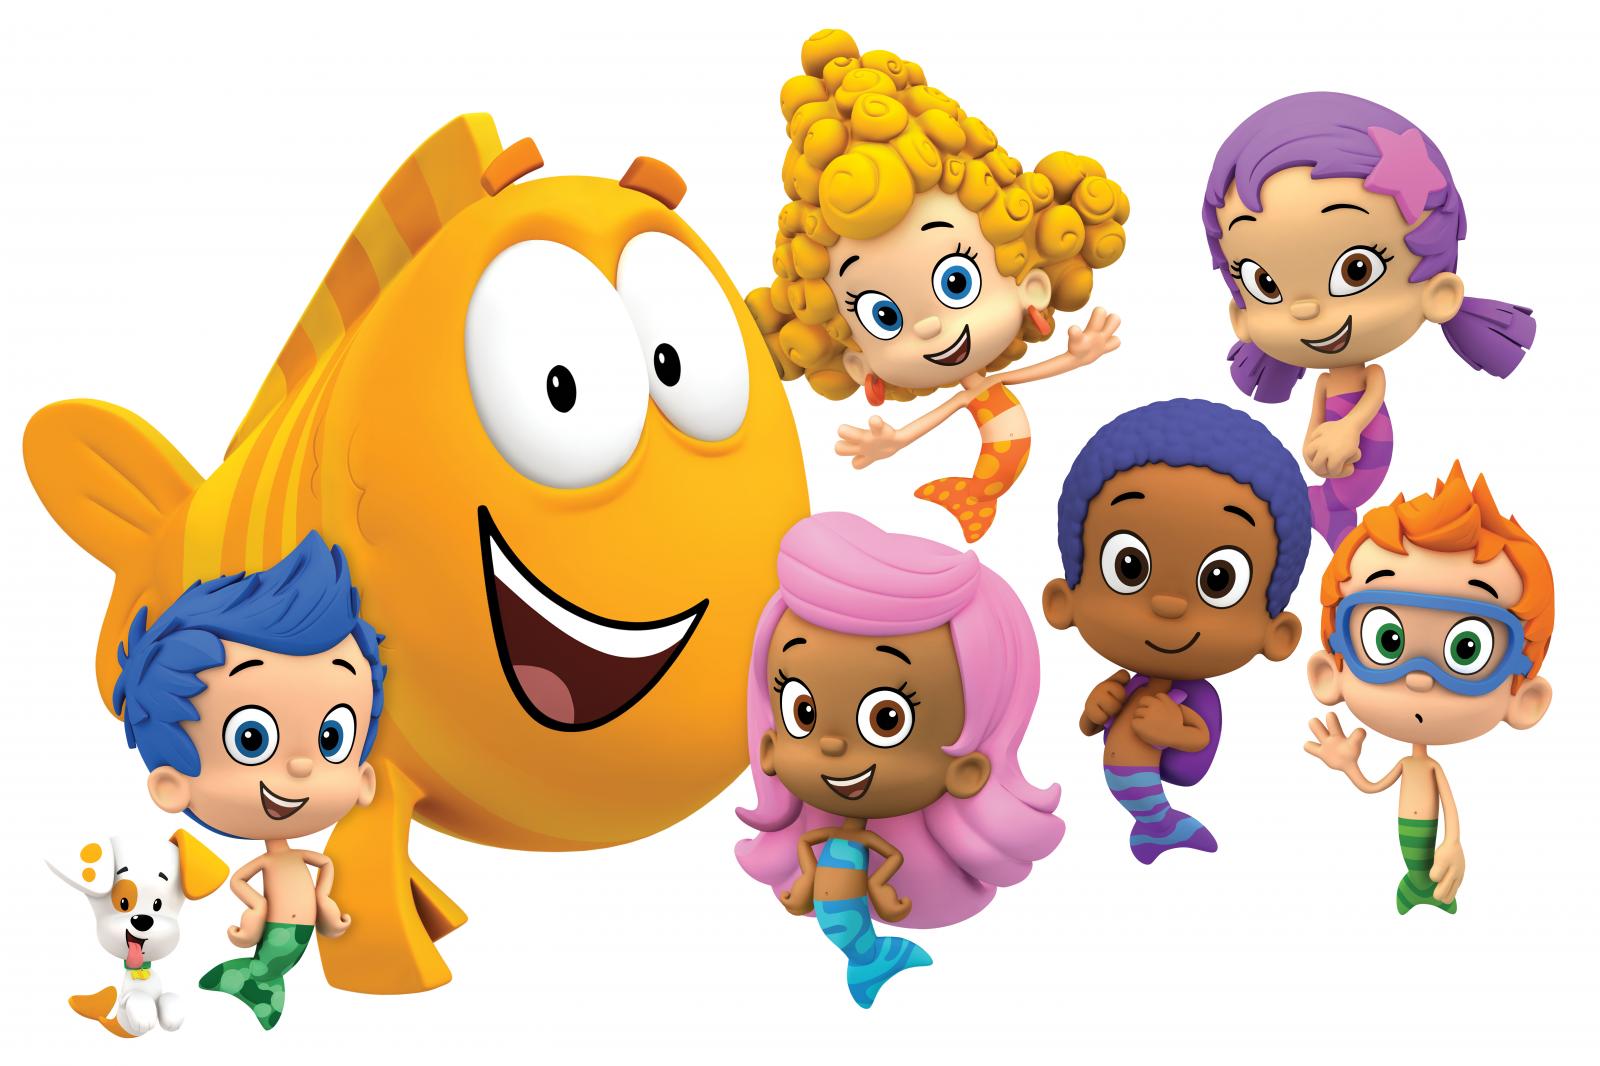 Bubble Guppies Wallpapers High Quality Download Free.